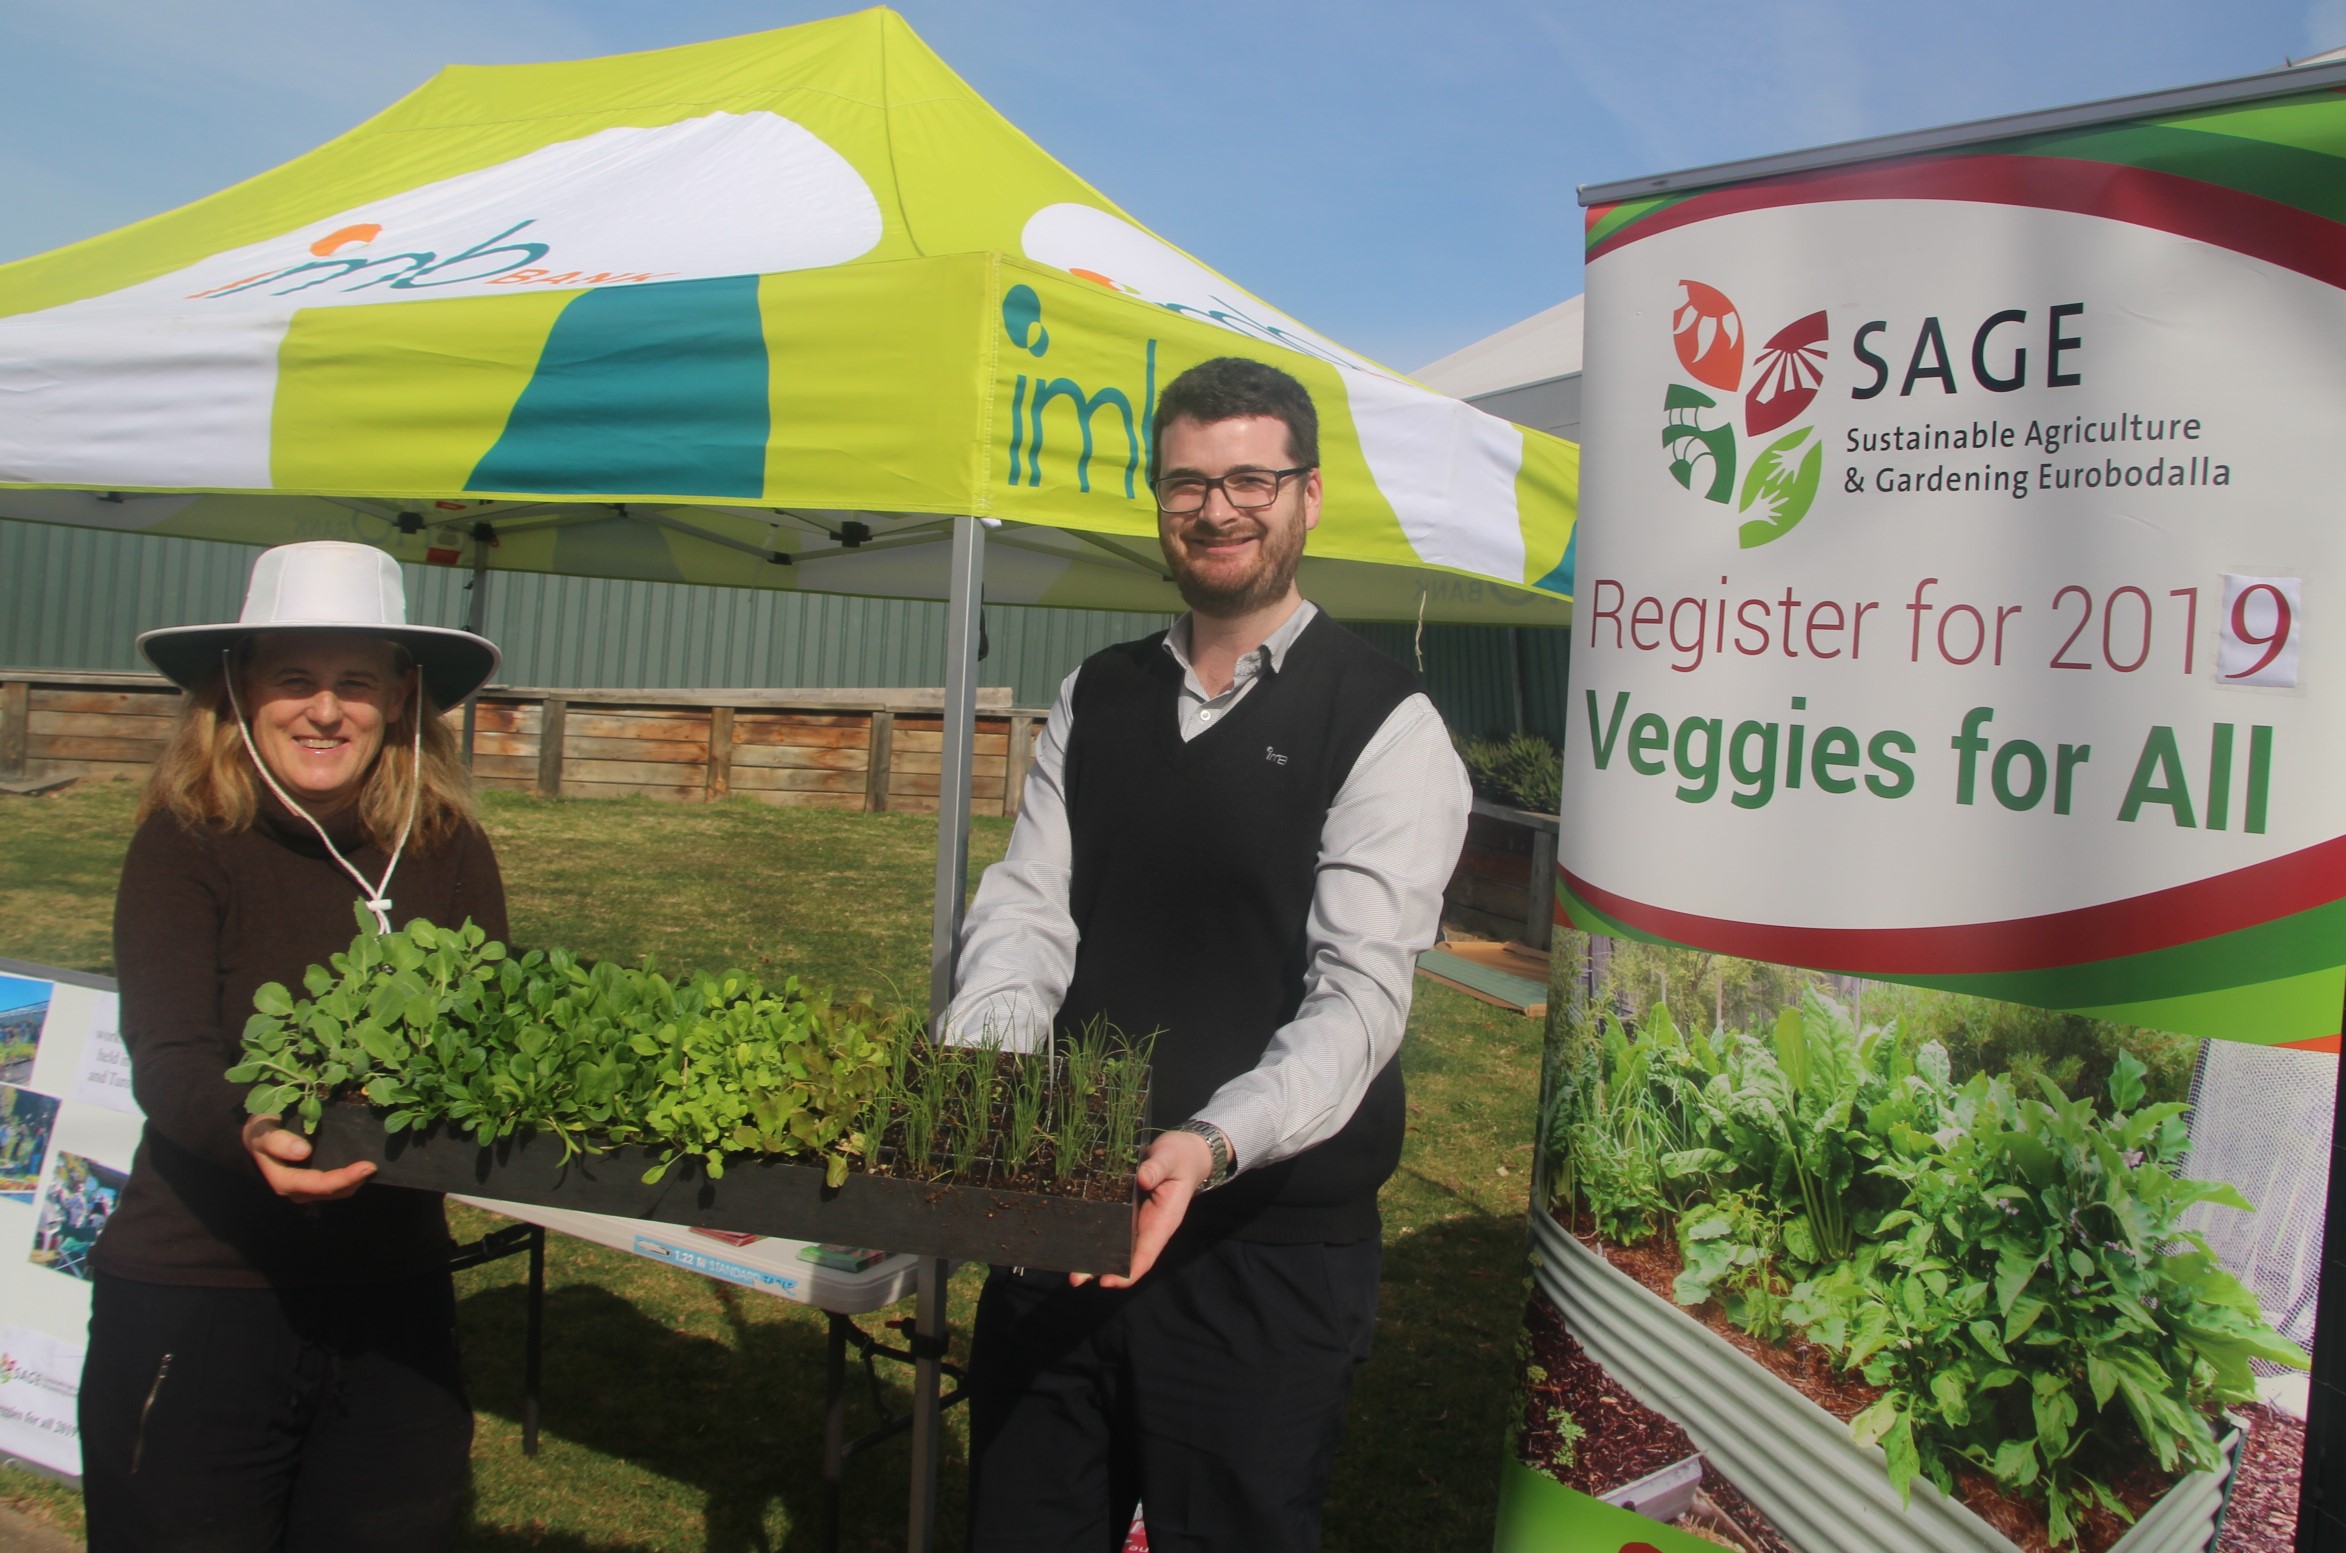 'Veggies for All' grows in Eurobodalla with grant funding